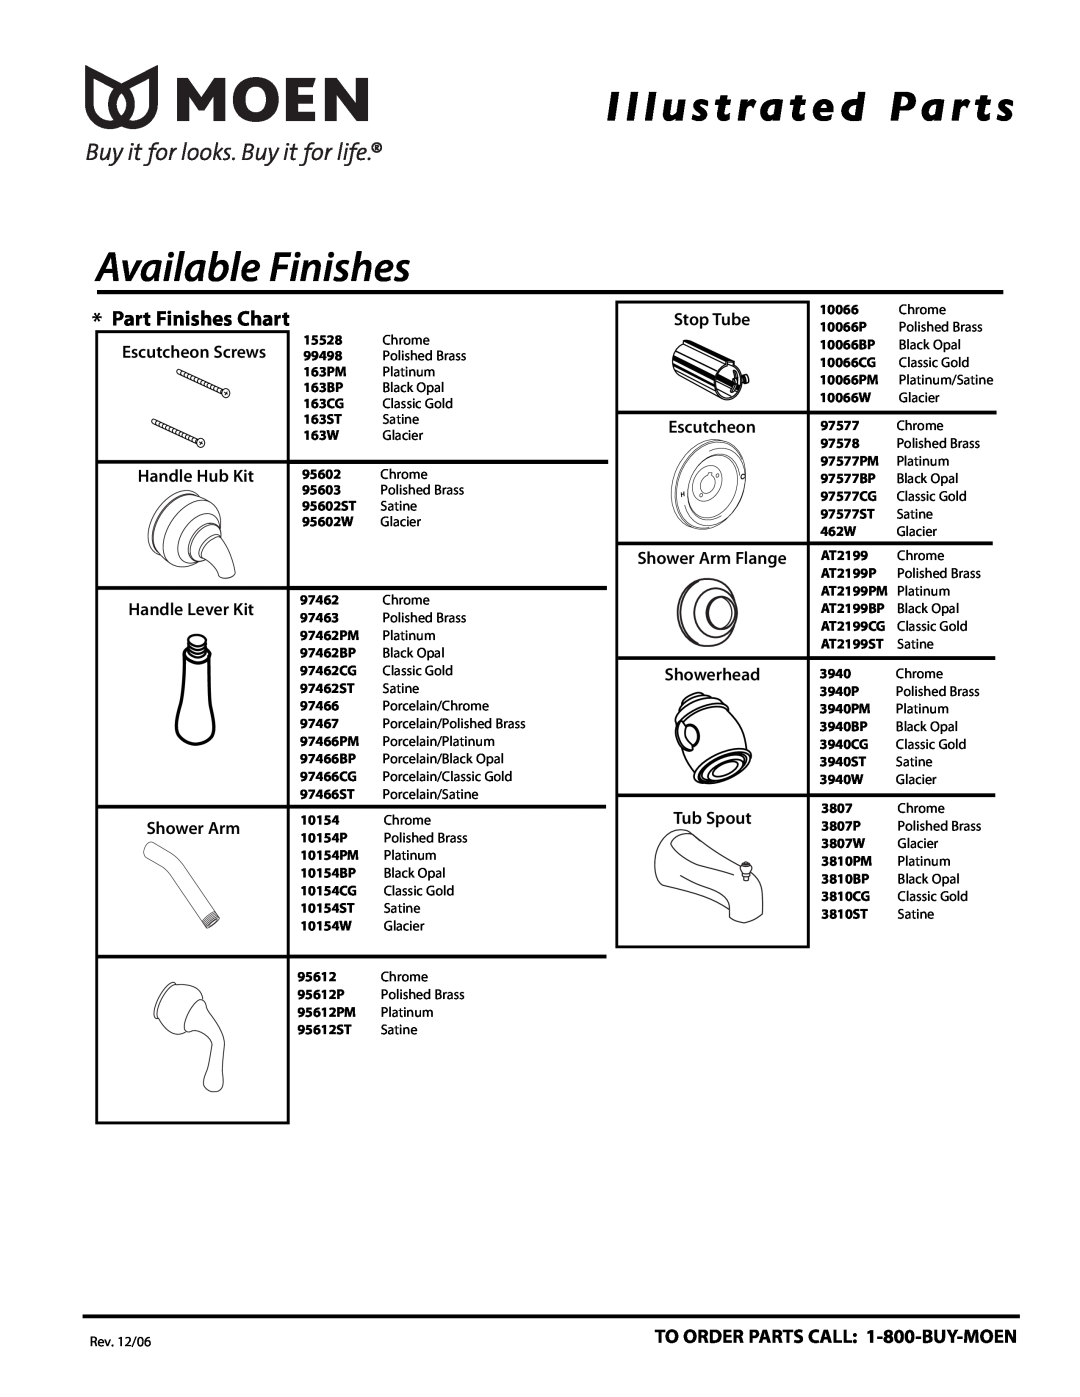 Moen T3124PM Part Finishes Chart, Available Finishes, Illustrated Par ts, Handle Lever Kit, Handle Hub Kit, Stop Tube 